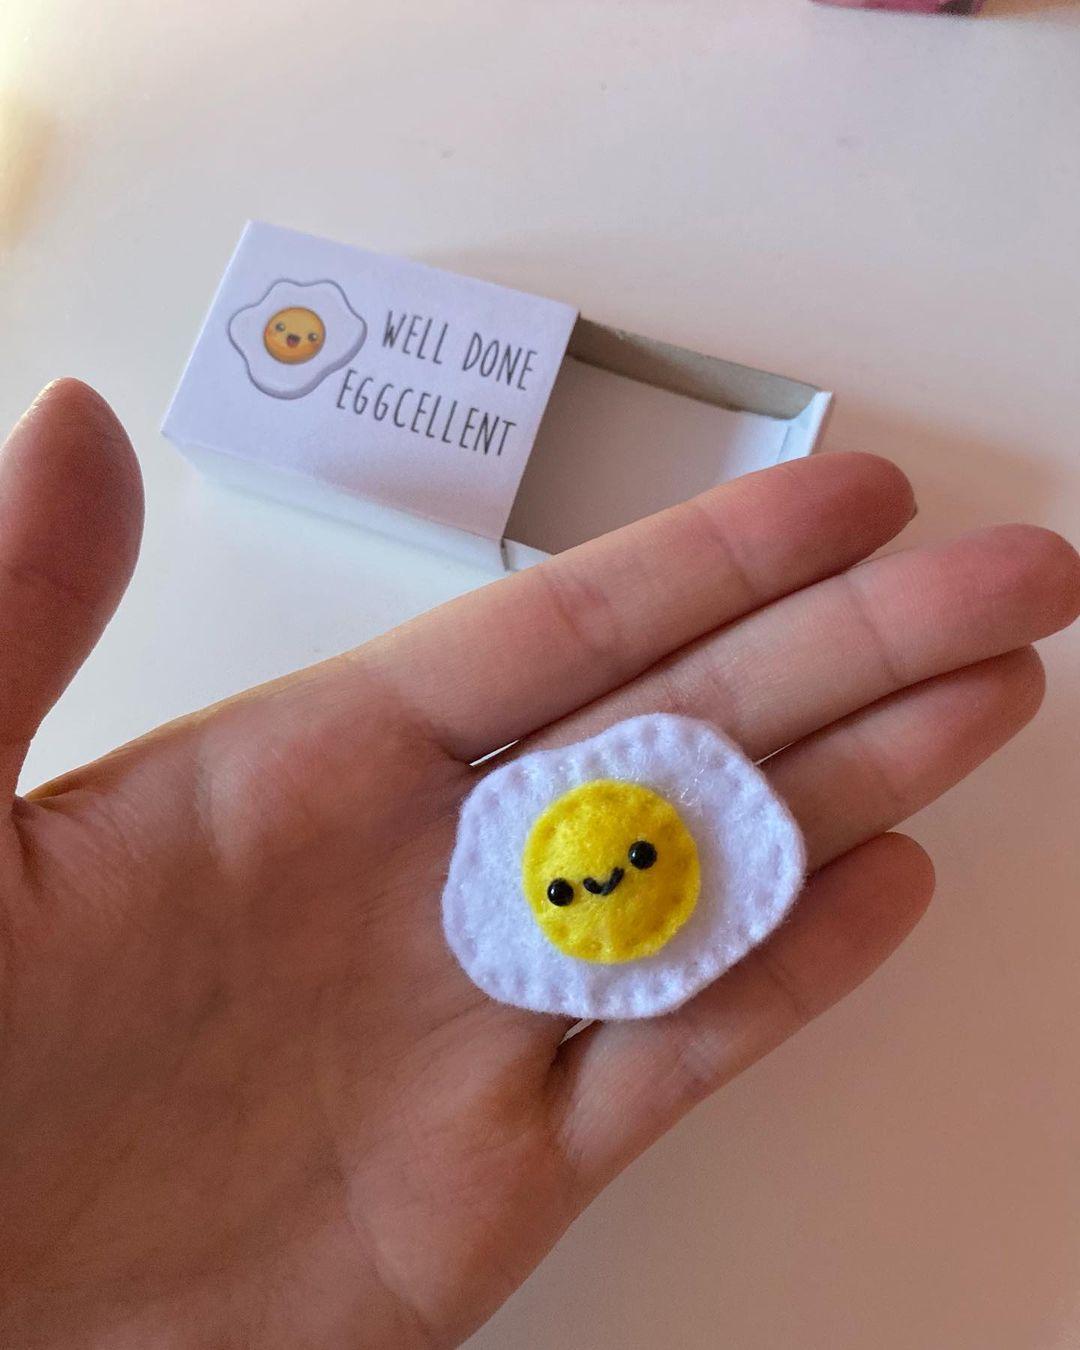 class="content__text"This is a perfect gift for someone who has just passed an exam or driving test! Mini fried egg magnet matchbox gift 🍳 #egg #fried egg #eggmagnet #birthdaycard #welldonecard #novelty #humour #pun #fun #love #cute #handmade #congratulations #etsy #etsyseller #welldonegift #instagram #instadaily #instagood #instalike #instalove #craft #crafter #crafty #felt #maker #exams #exam #examresults #instagramhub